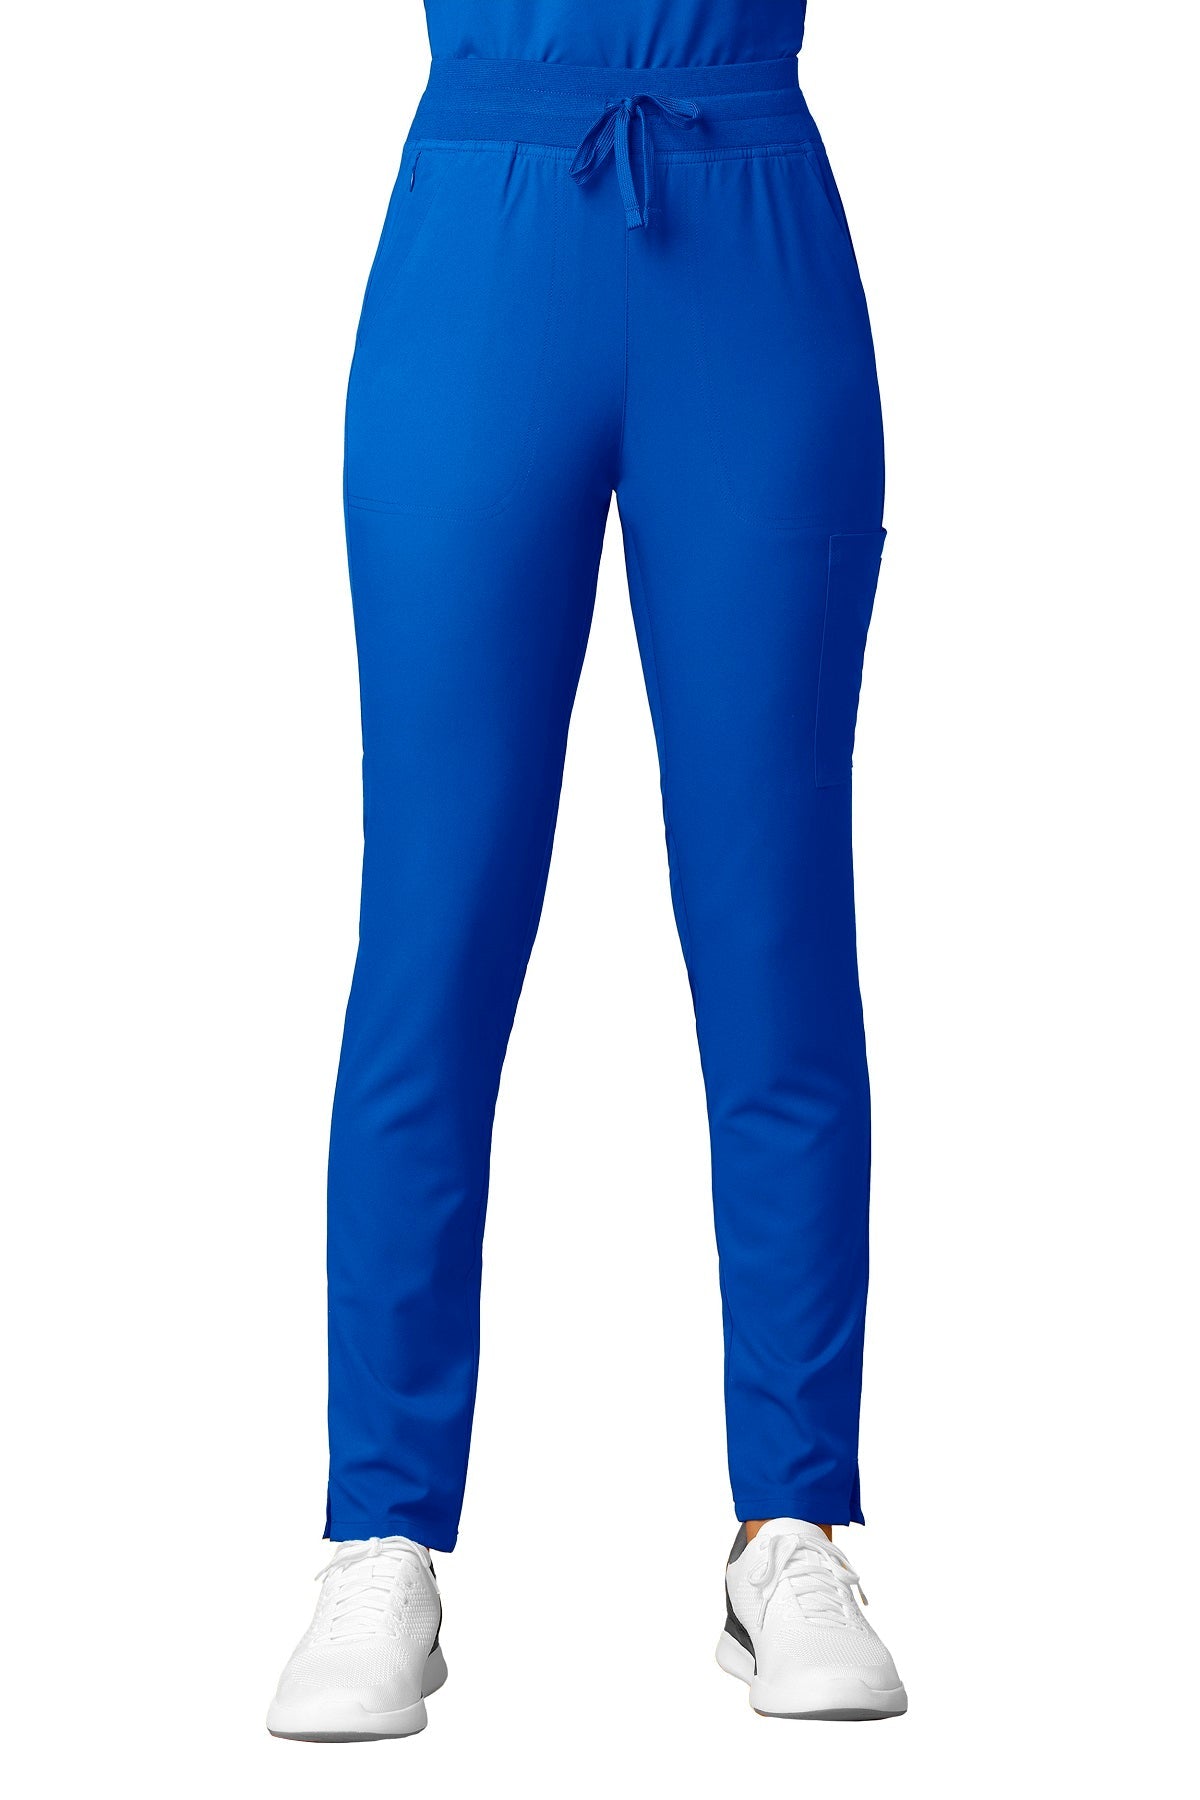 WonderWink Scrub Pants Thrive Cargo Straight Slim petite length in royal at Parker's Clothing and Shoes.